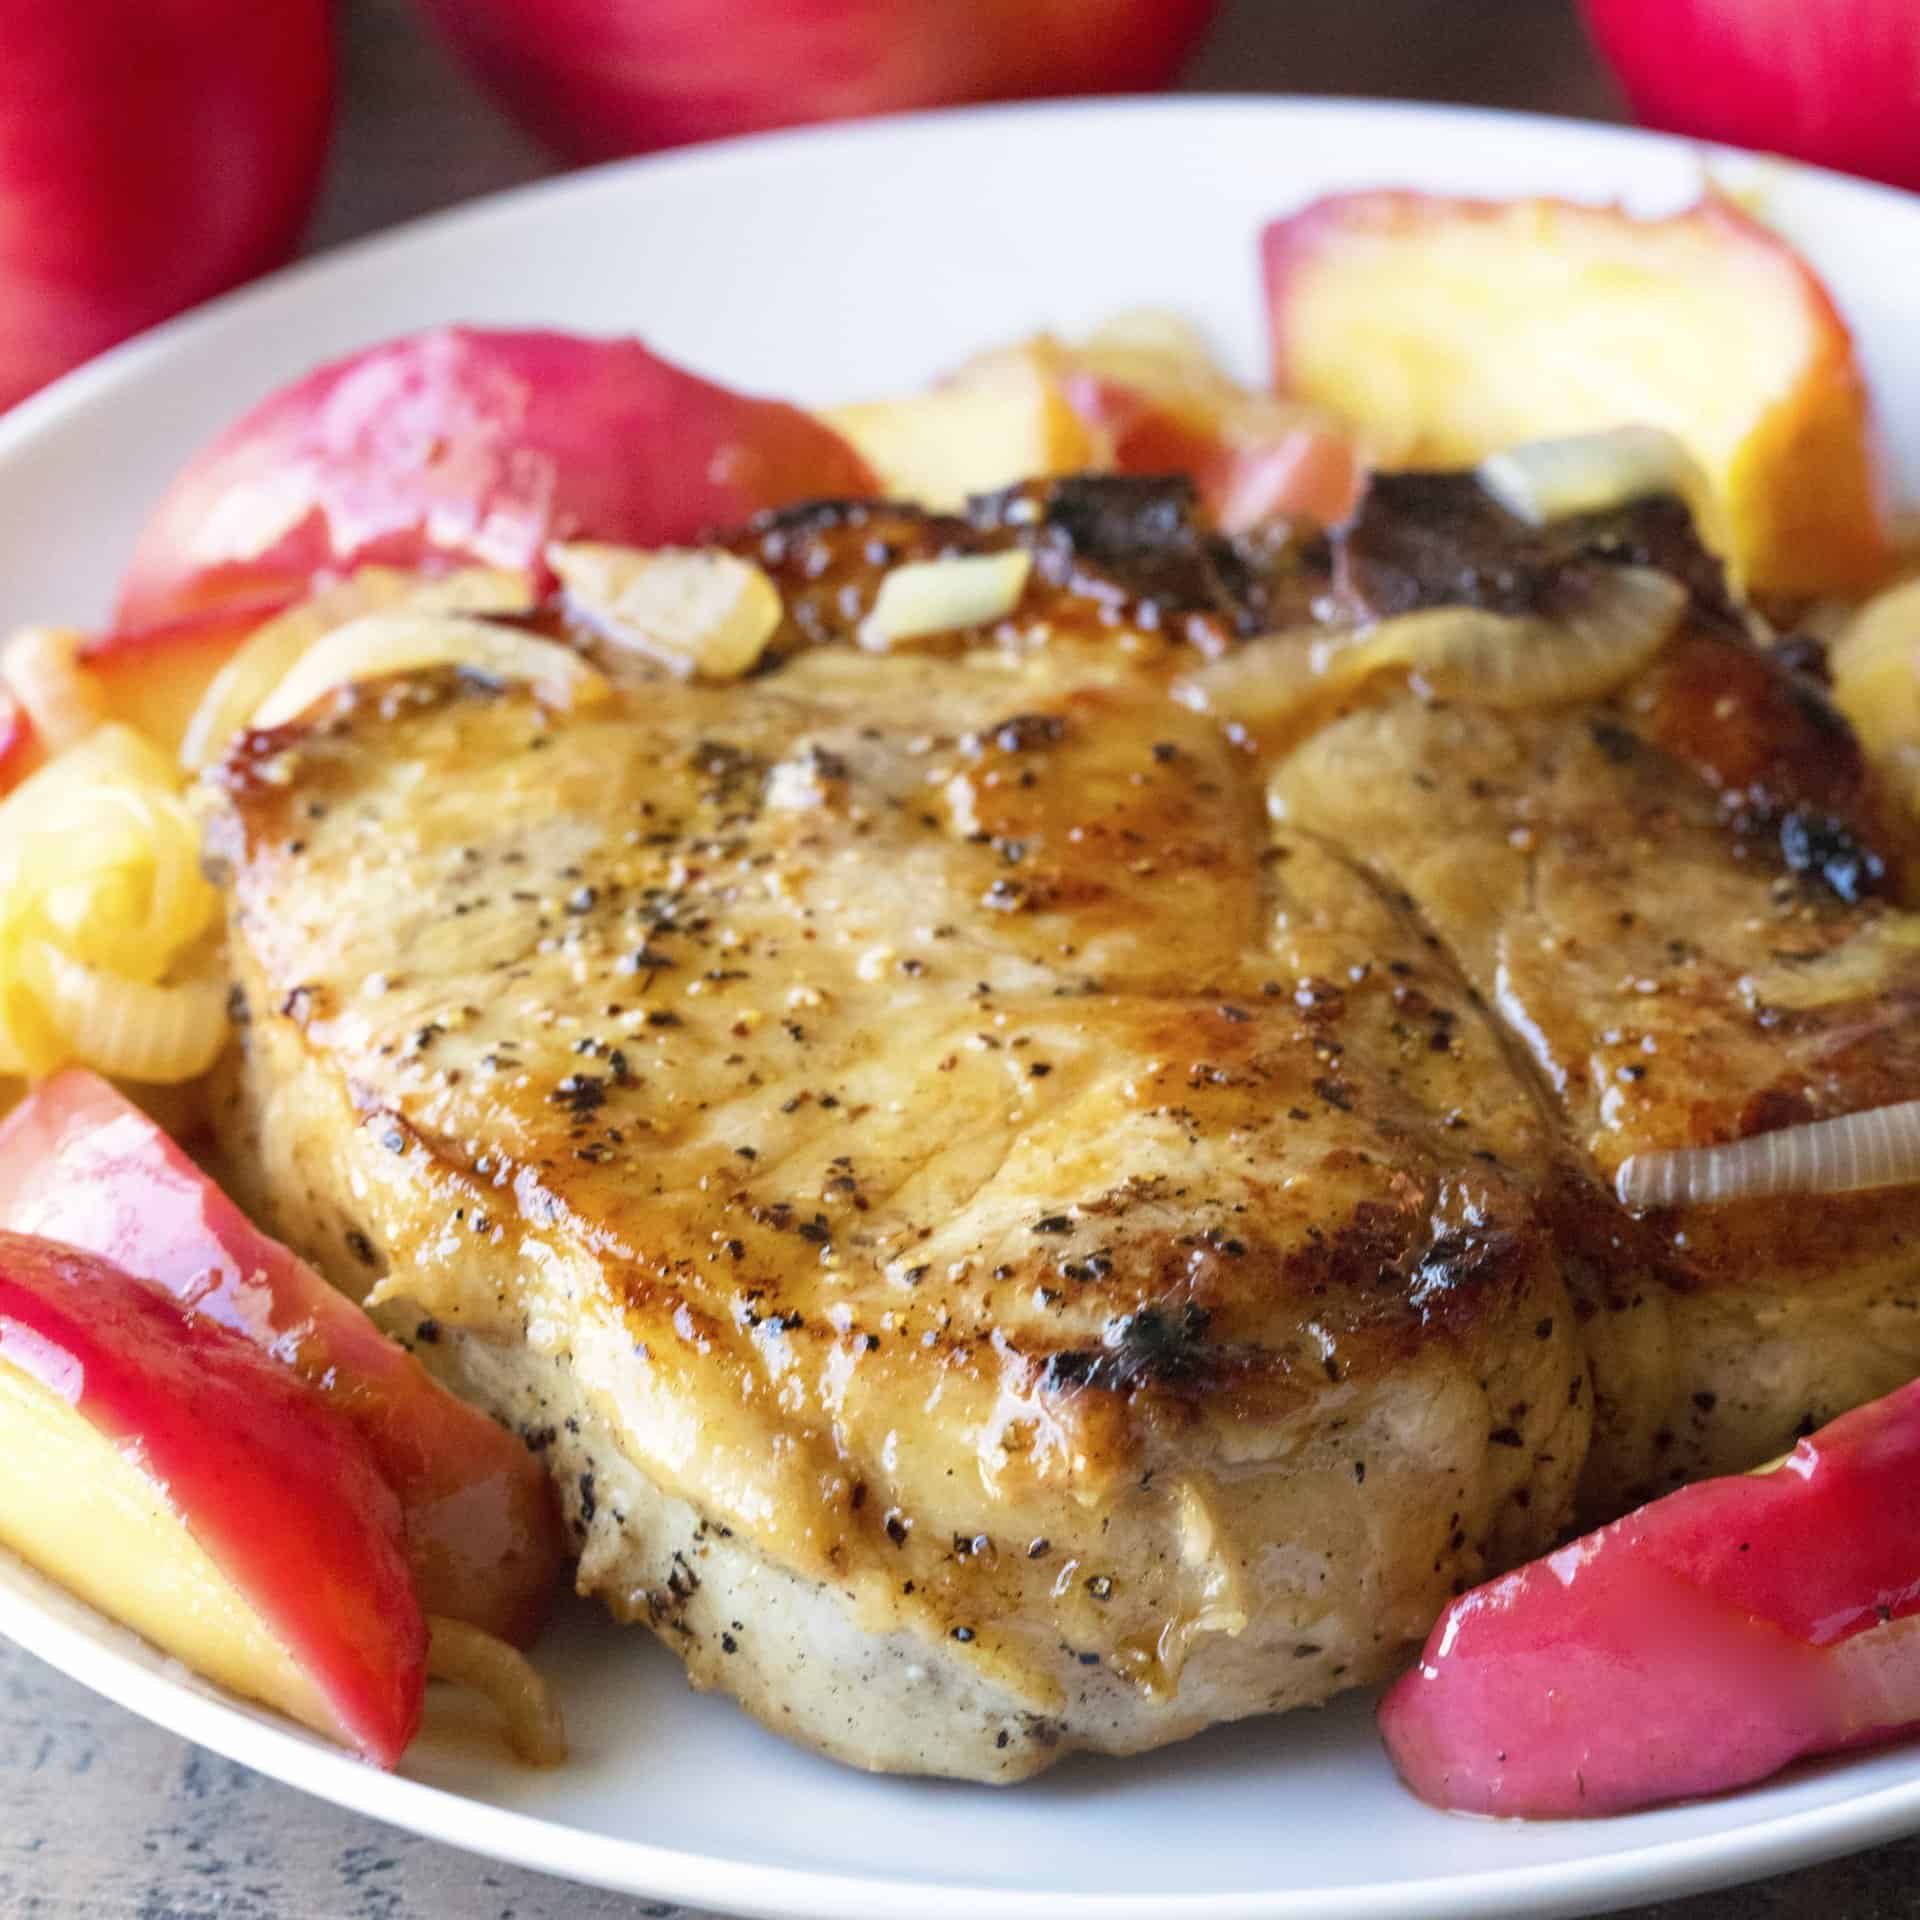 A pork chop cooked with an apple reduction, served on a plate with apple slices and caramelized onions